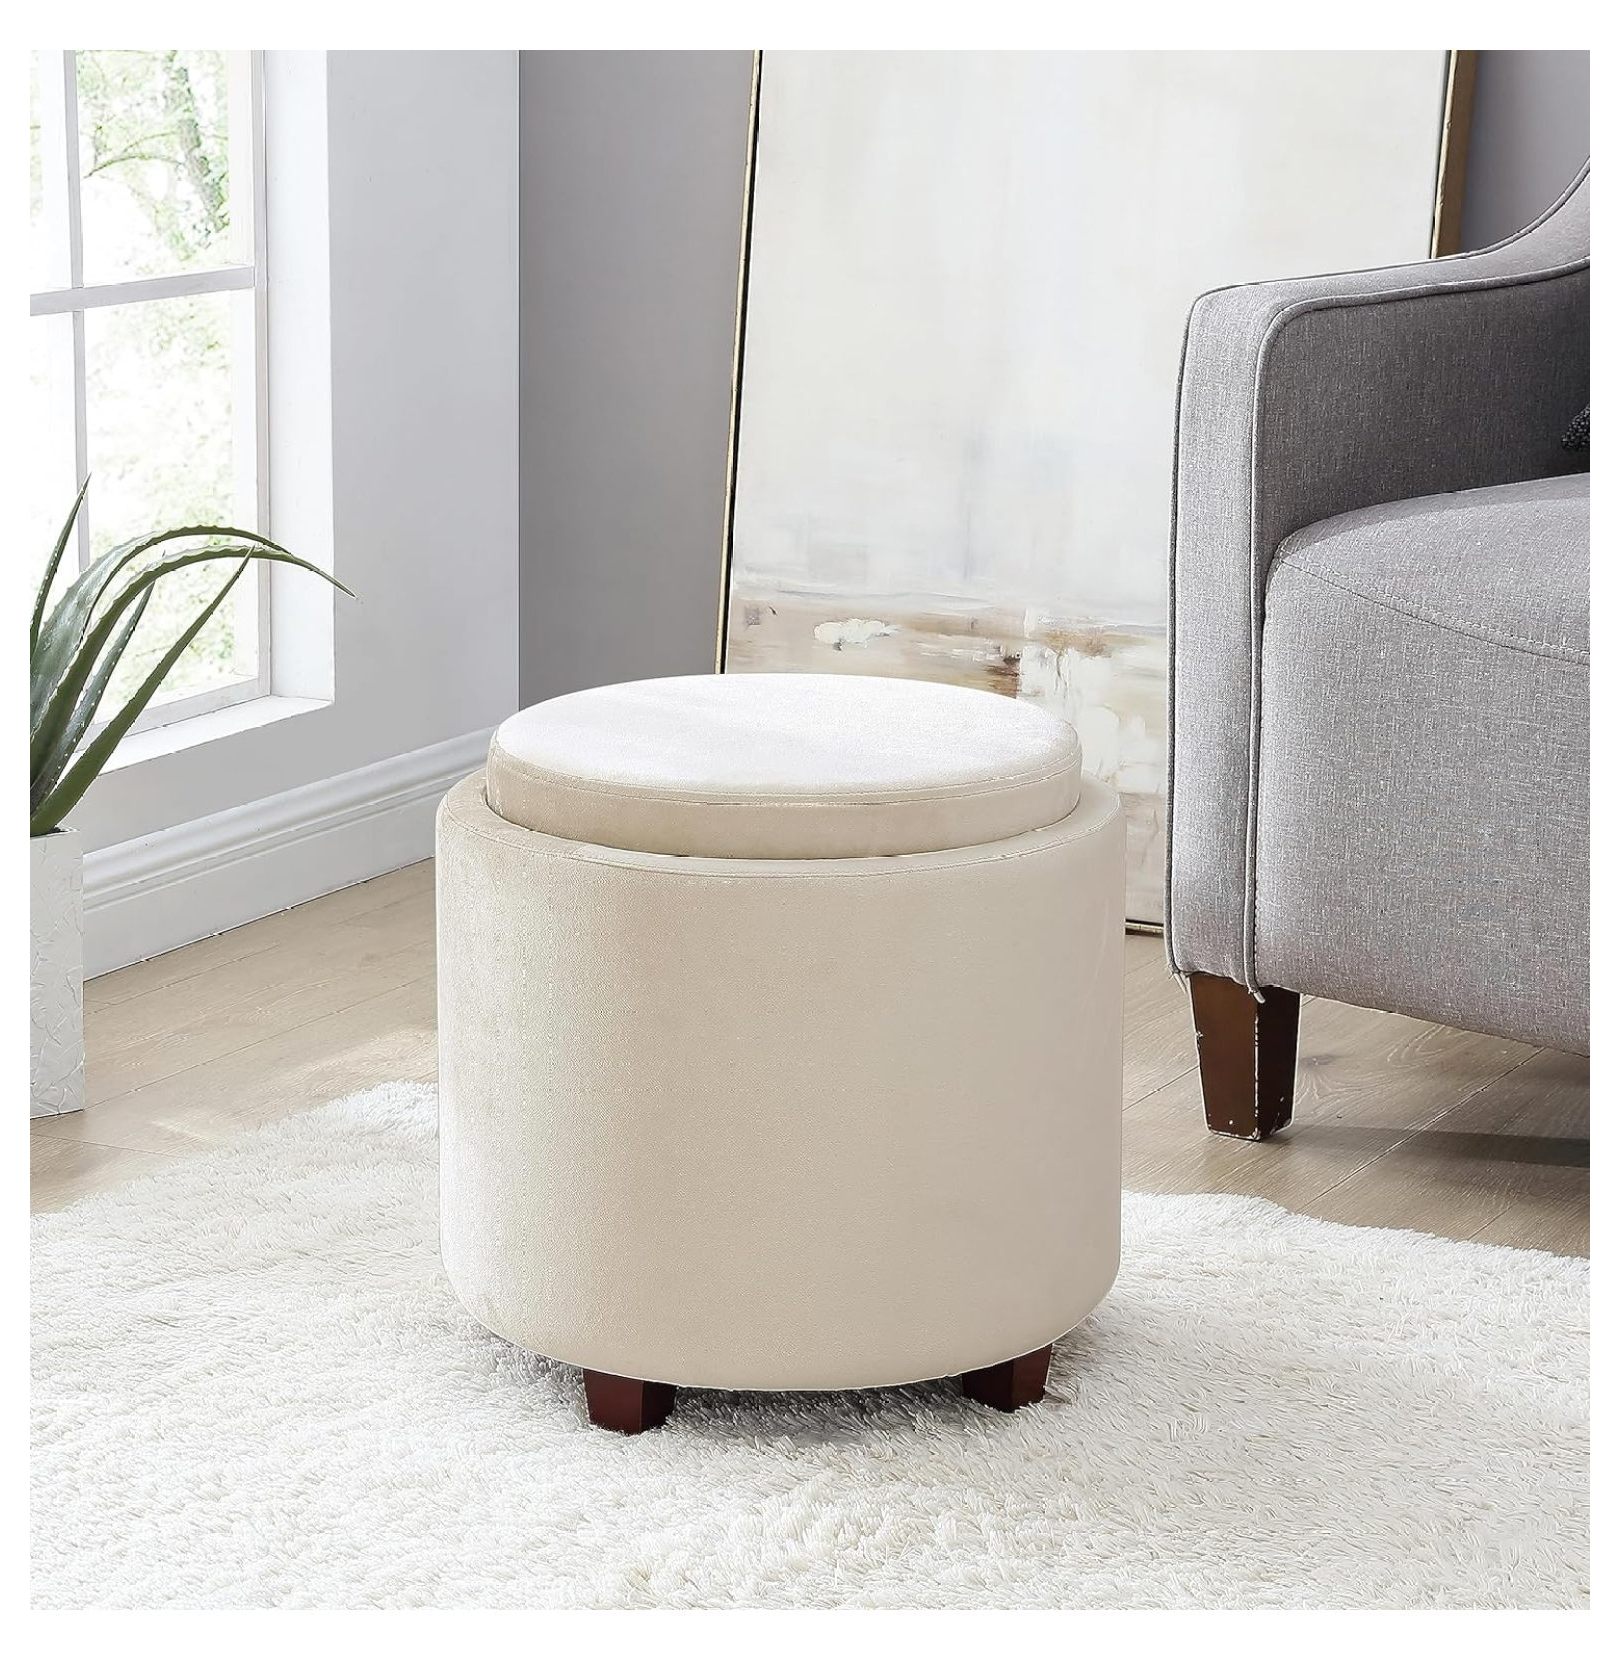 BULYAXIA Lawrence Round Storage Ottoman with Lift Off Lid and Tray Lid Coffee Table, Ottoman with Storage for Living Room, Bedroom and Office, Velvet Cream - image 3 of 7